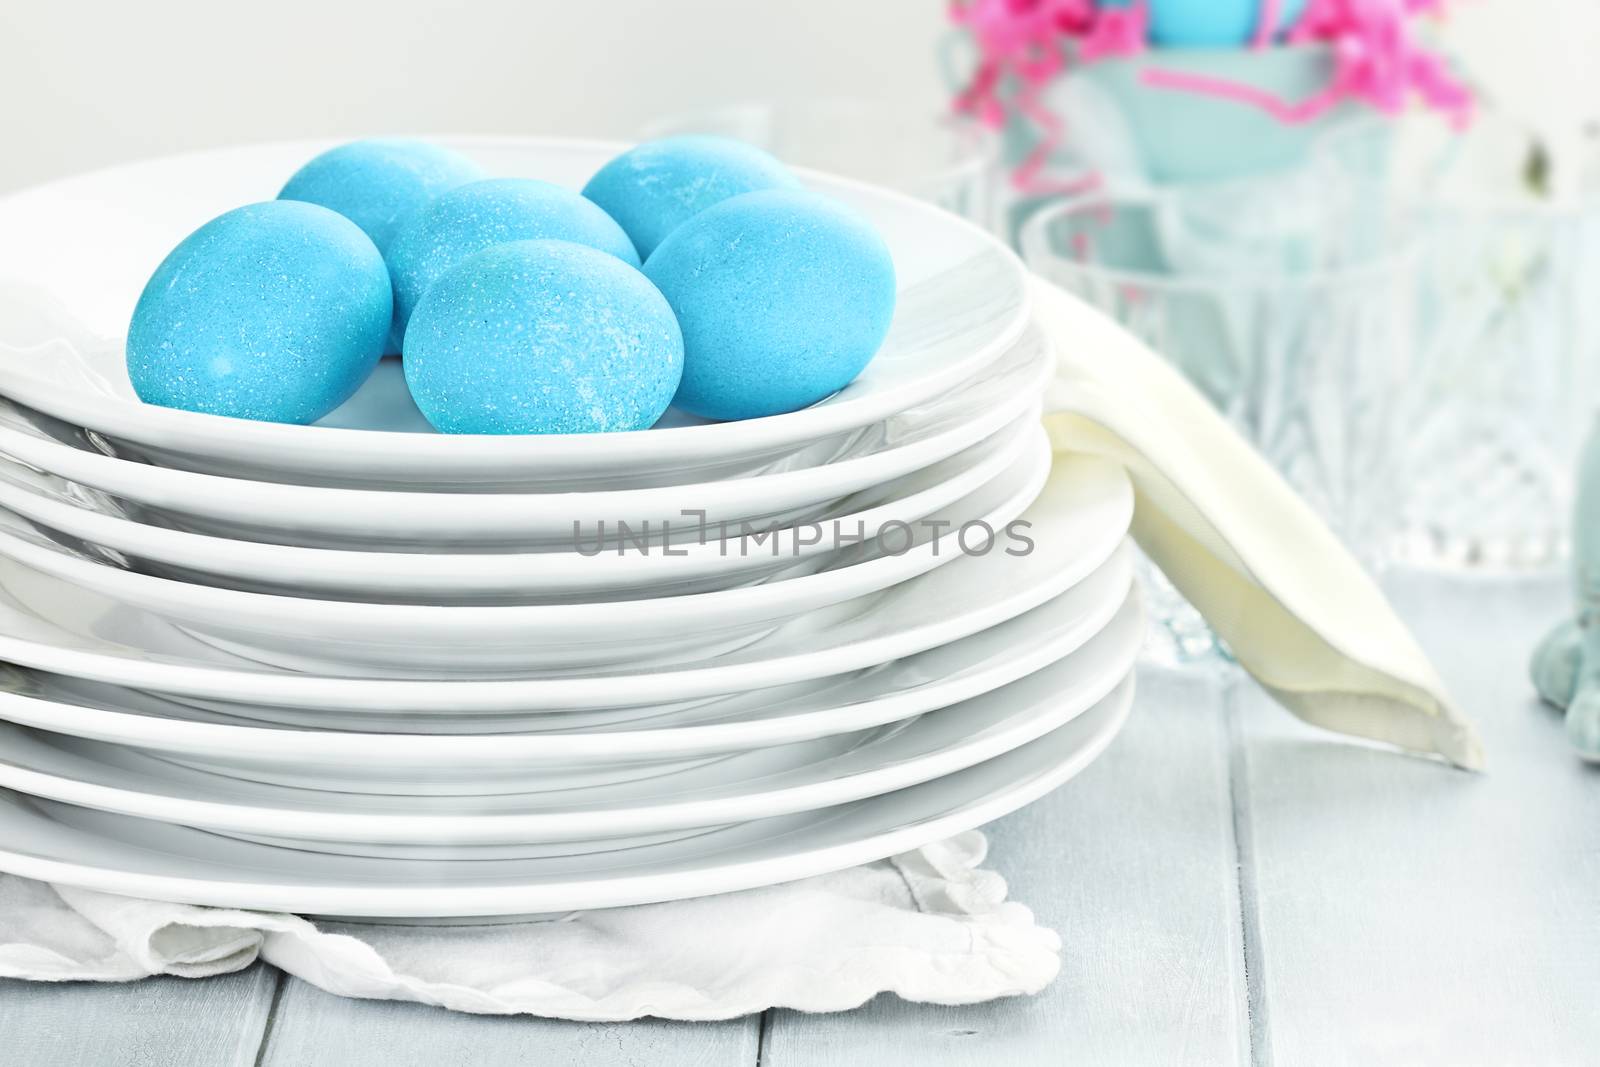 Blue dyed eggs with plates for Easte. Shallow depth of field.